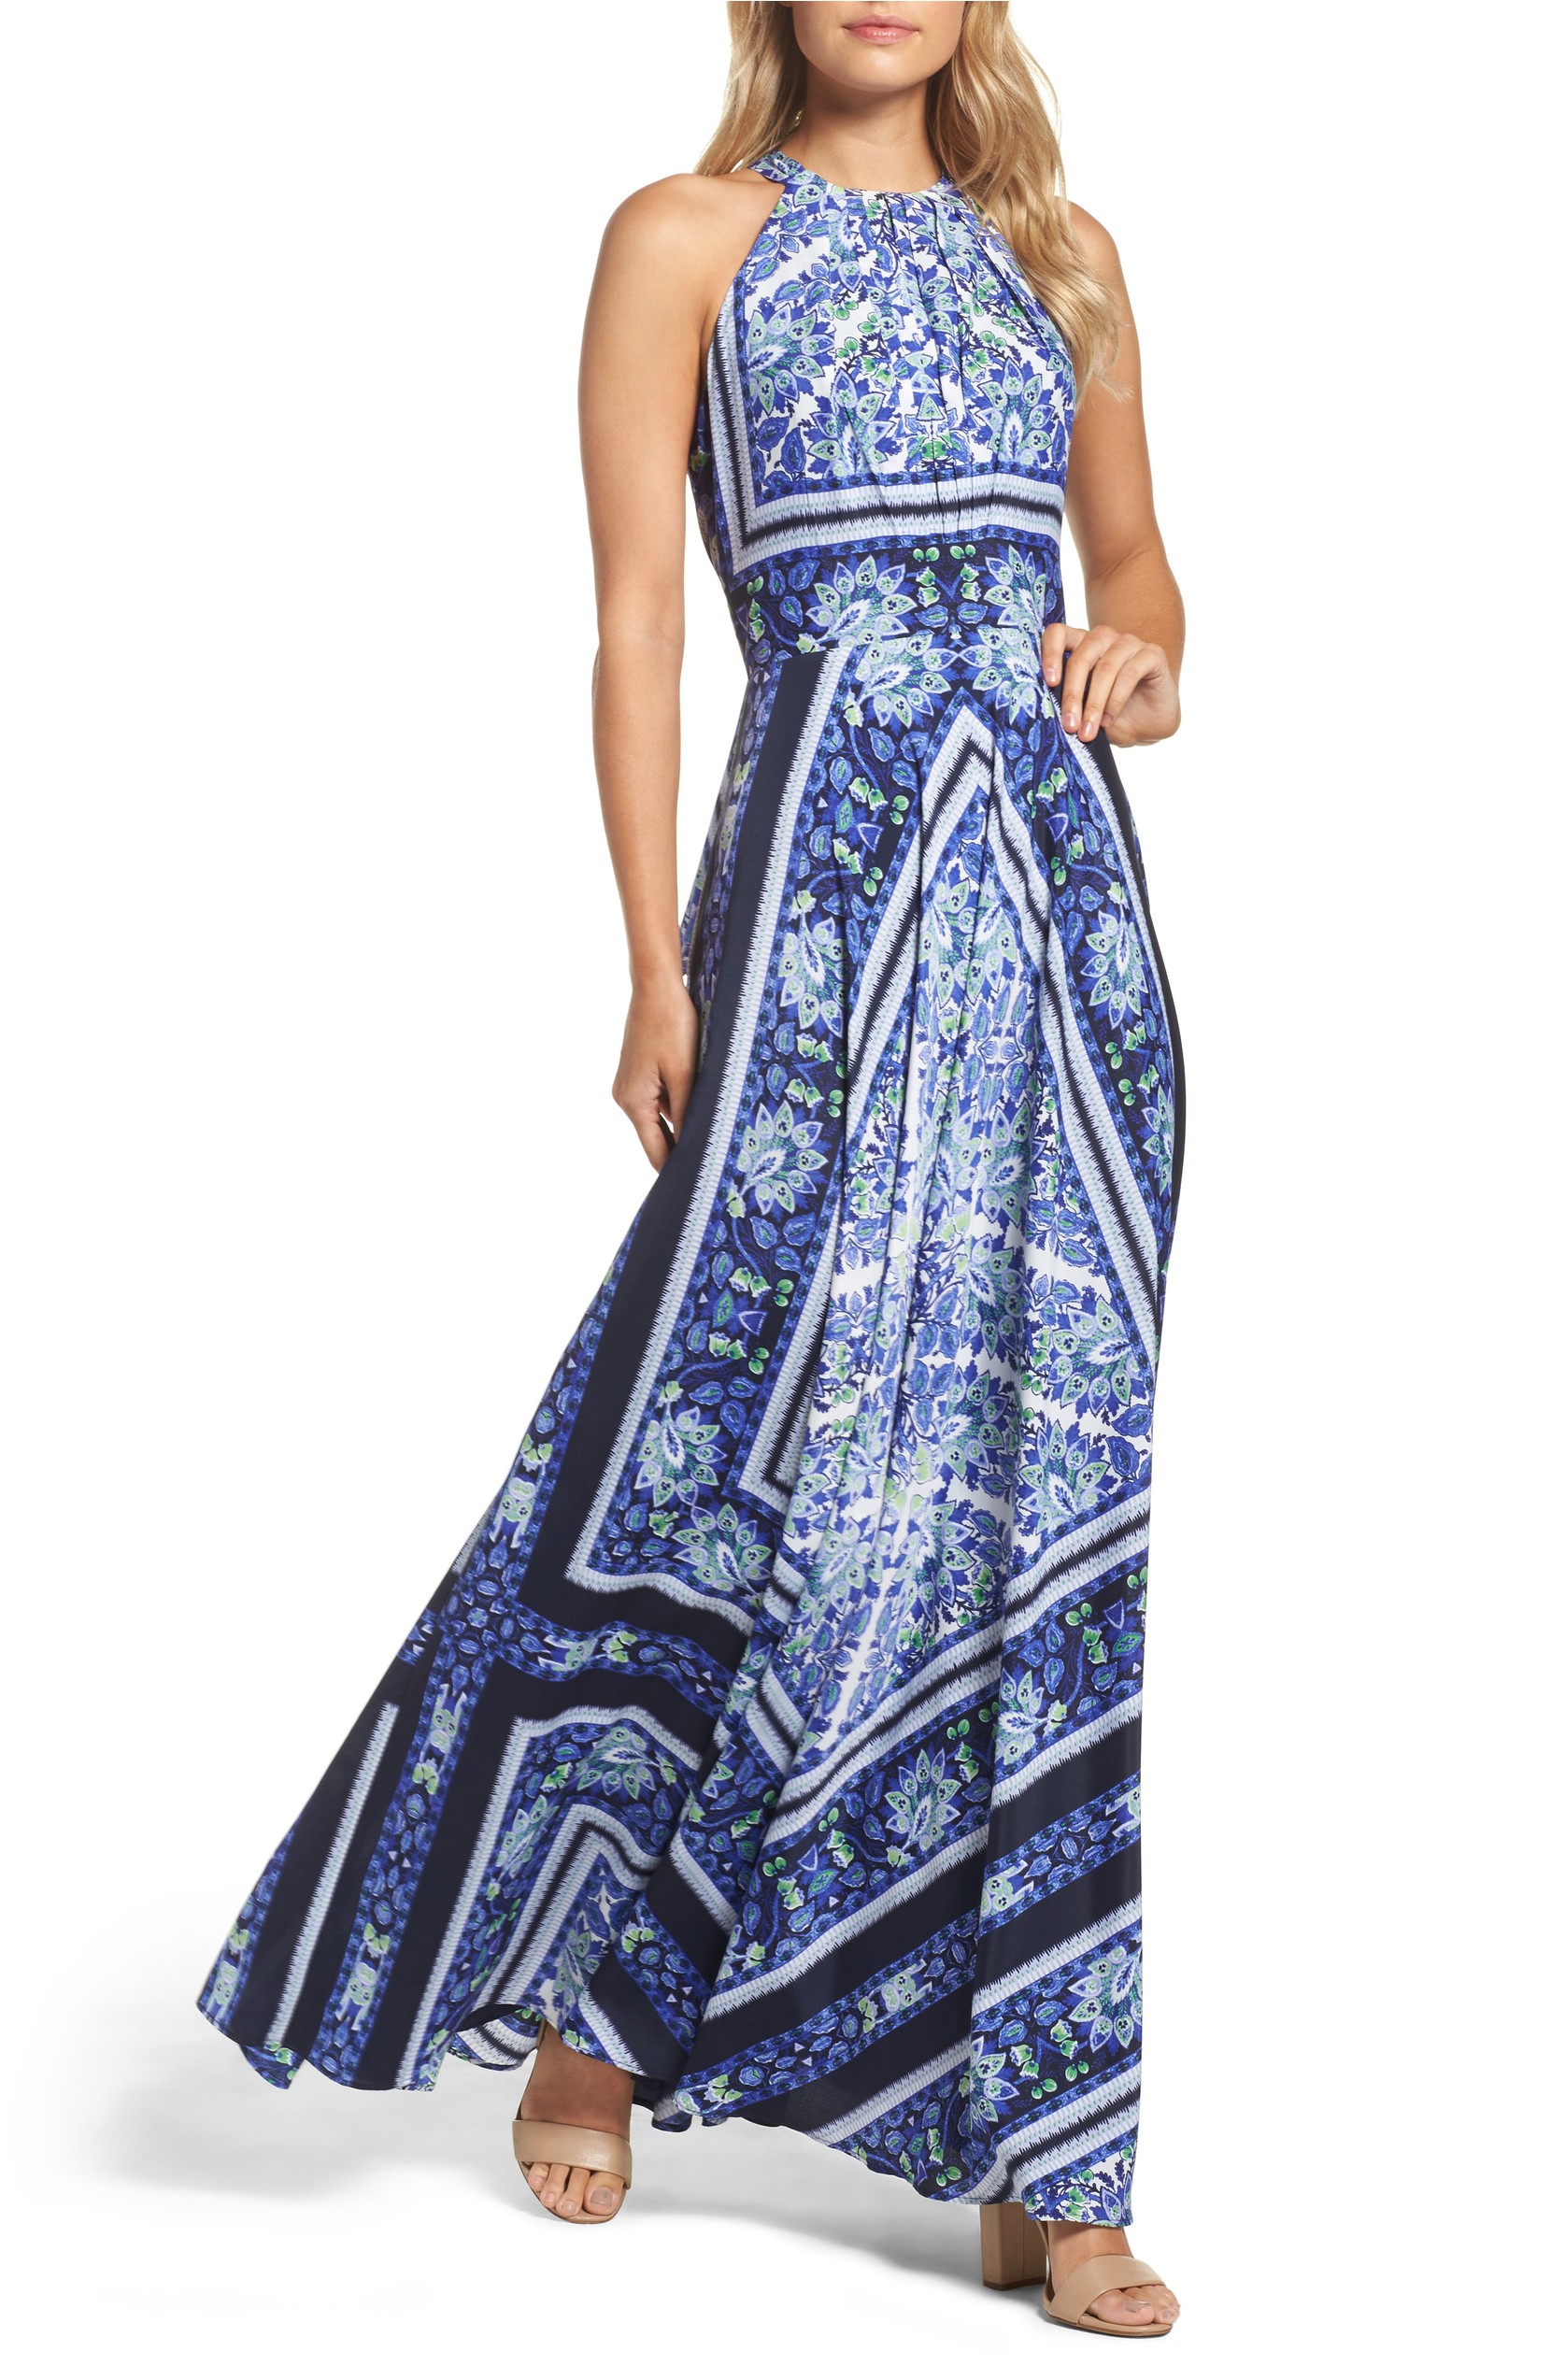 Wedding Guest Maxi Dresses — Floral, Scarf, Wrap Us Weekly